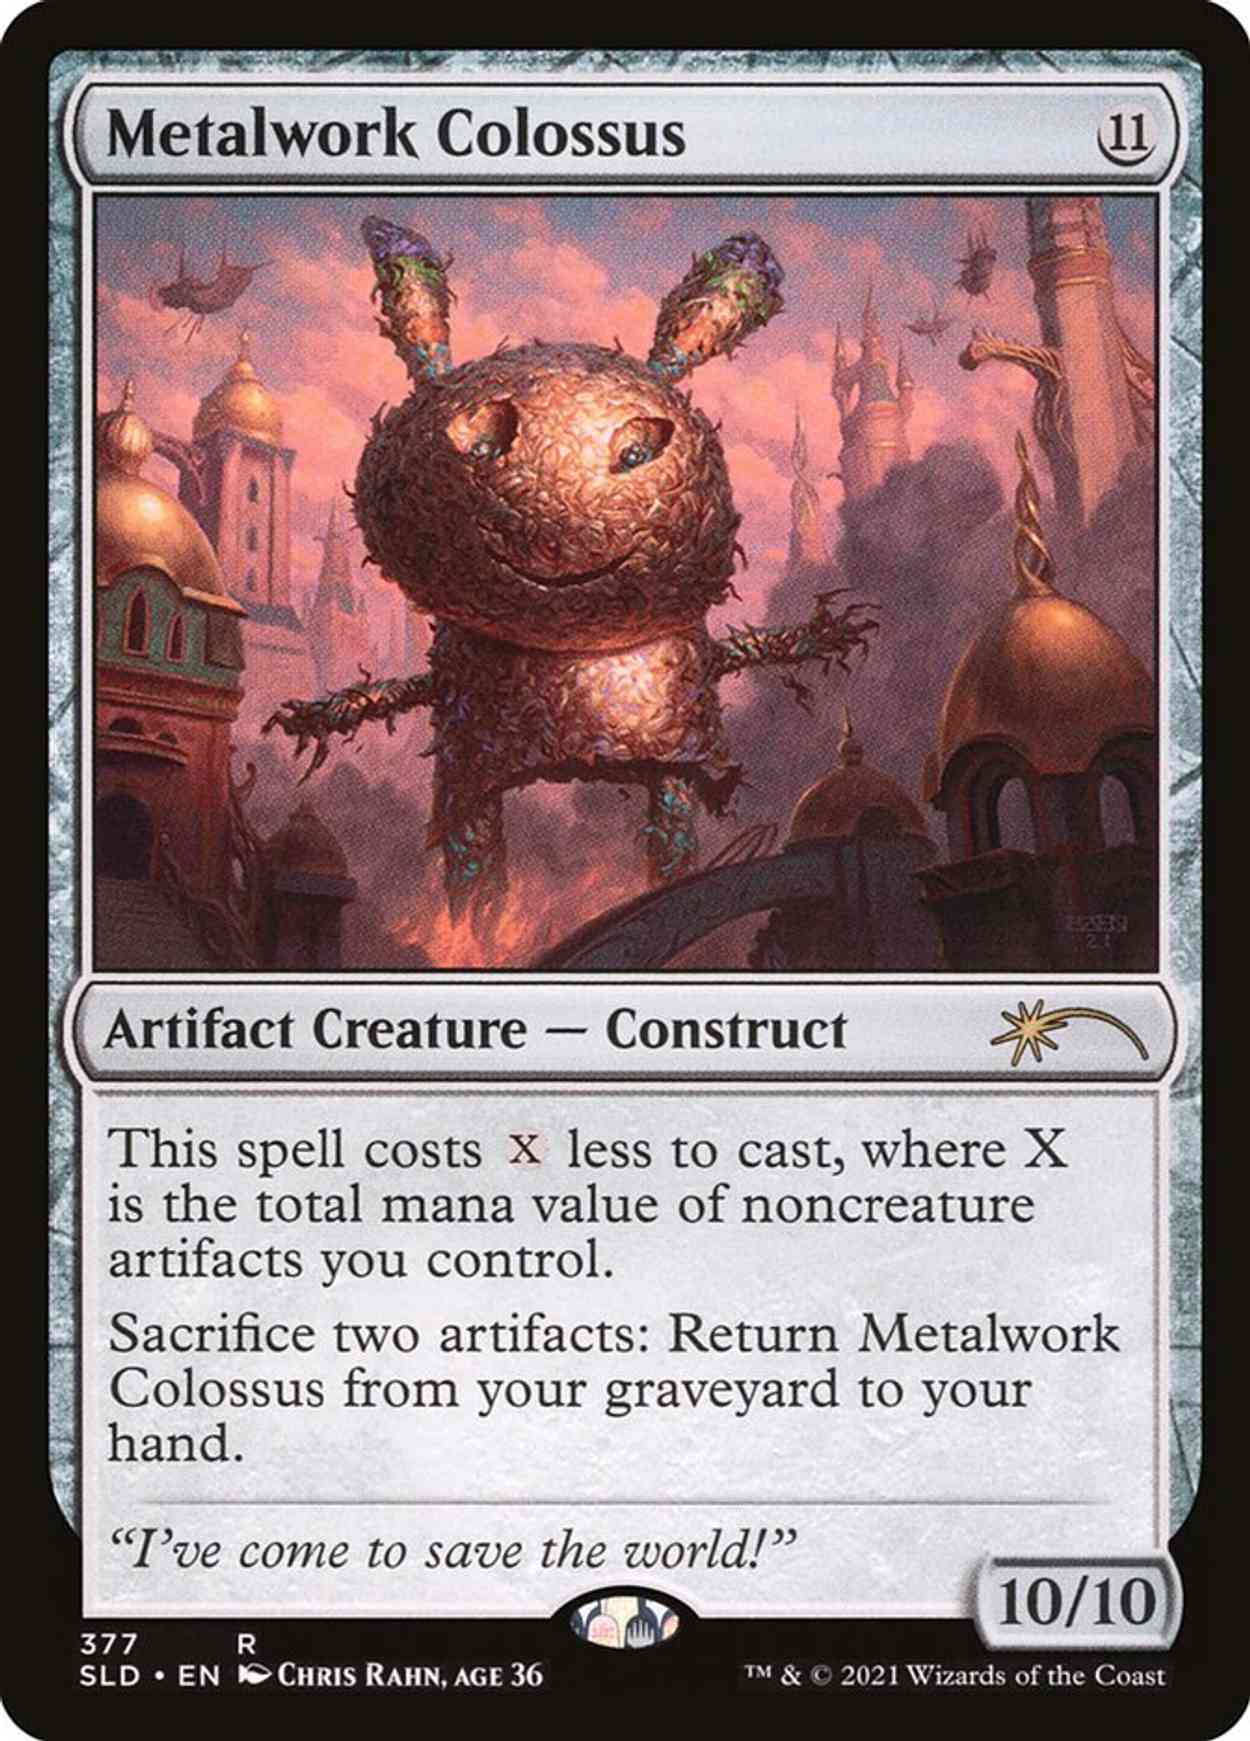 Metalwork Colossus (377) magic card front